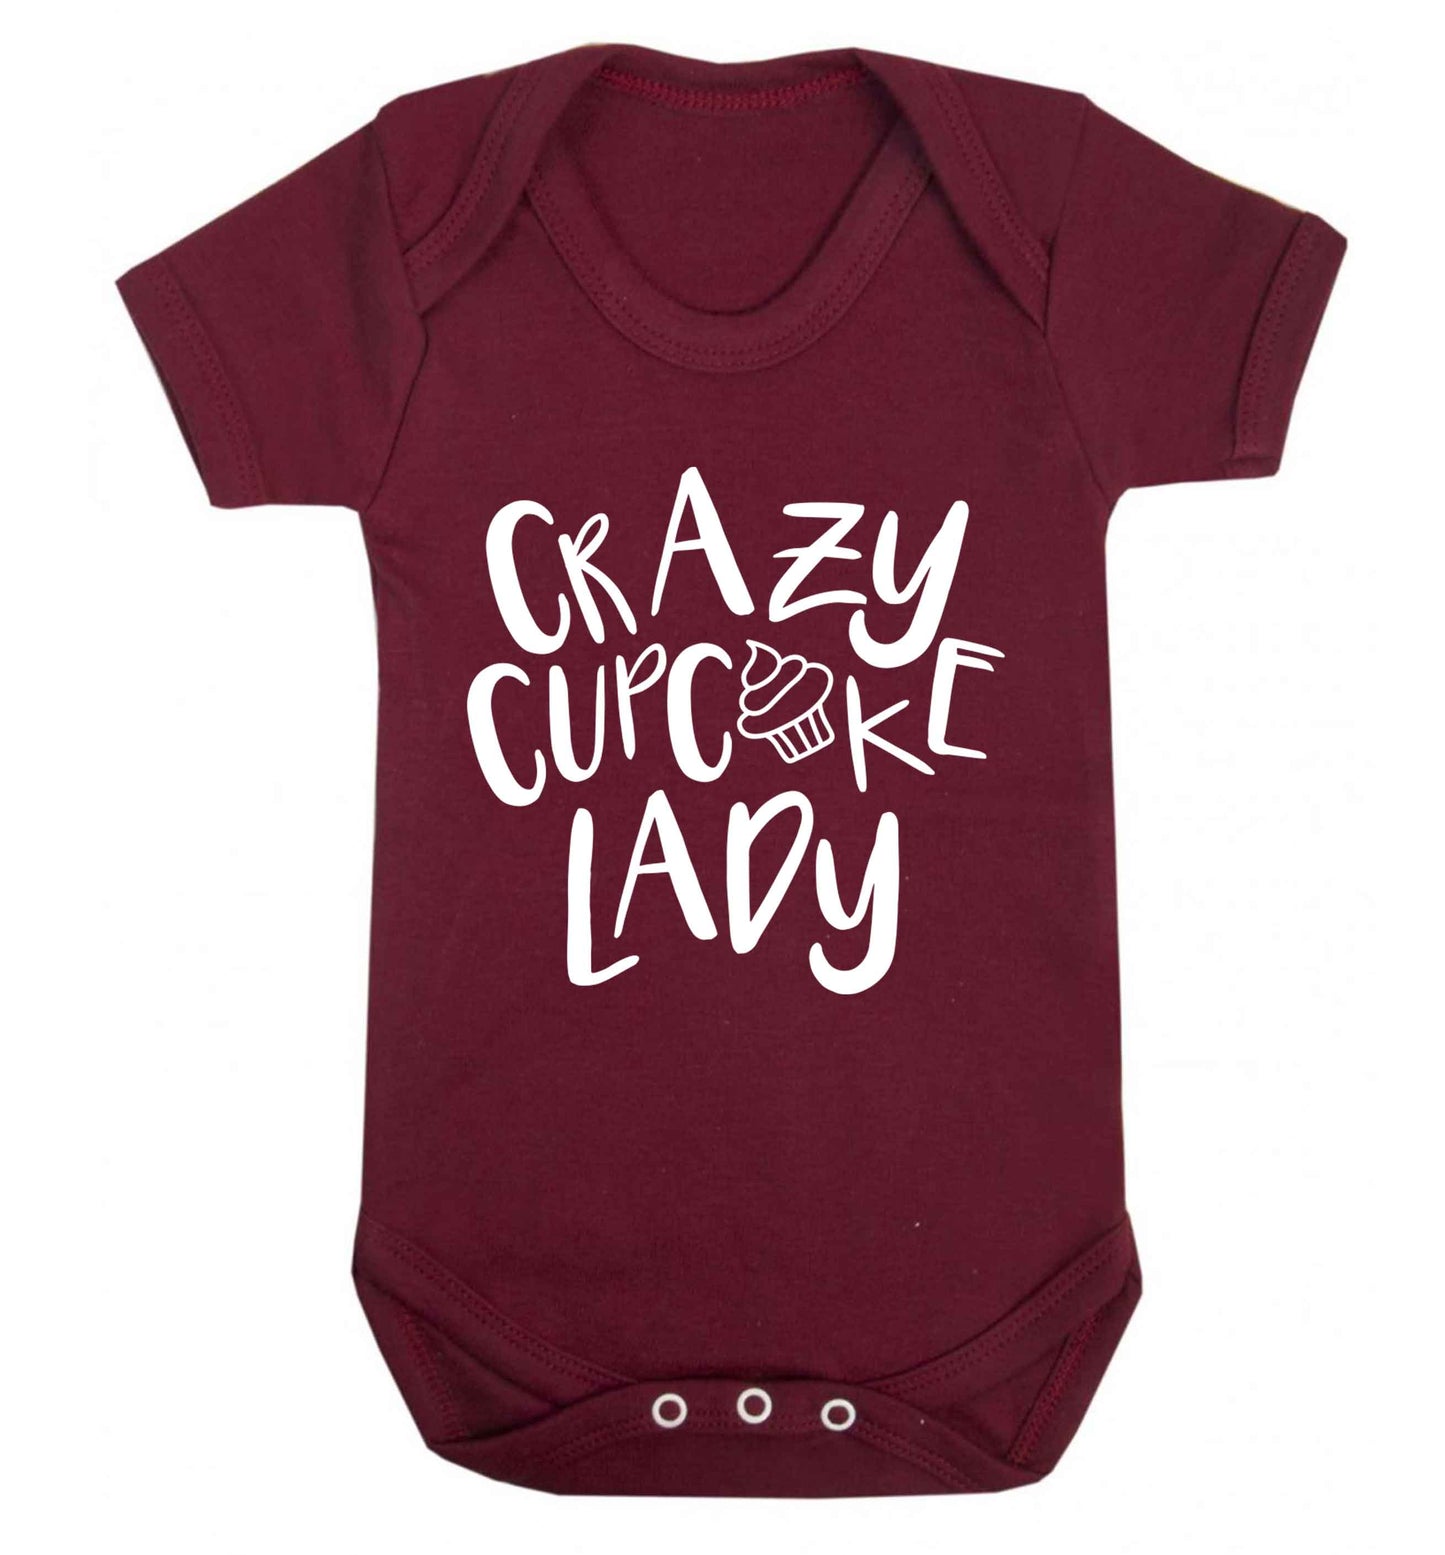 Crazy cupcake lady Baby Vest maroon 18-24 months